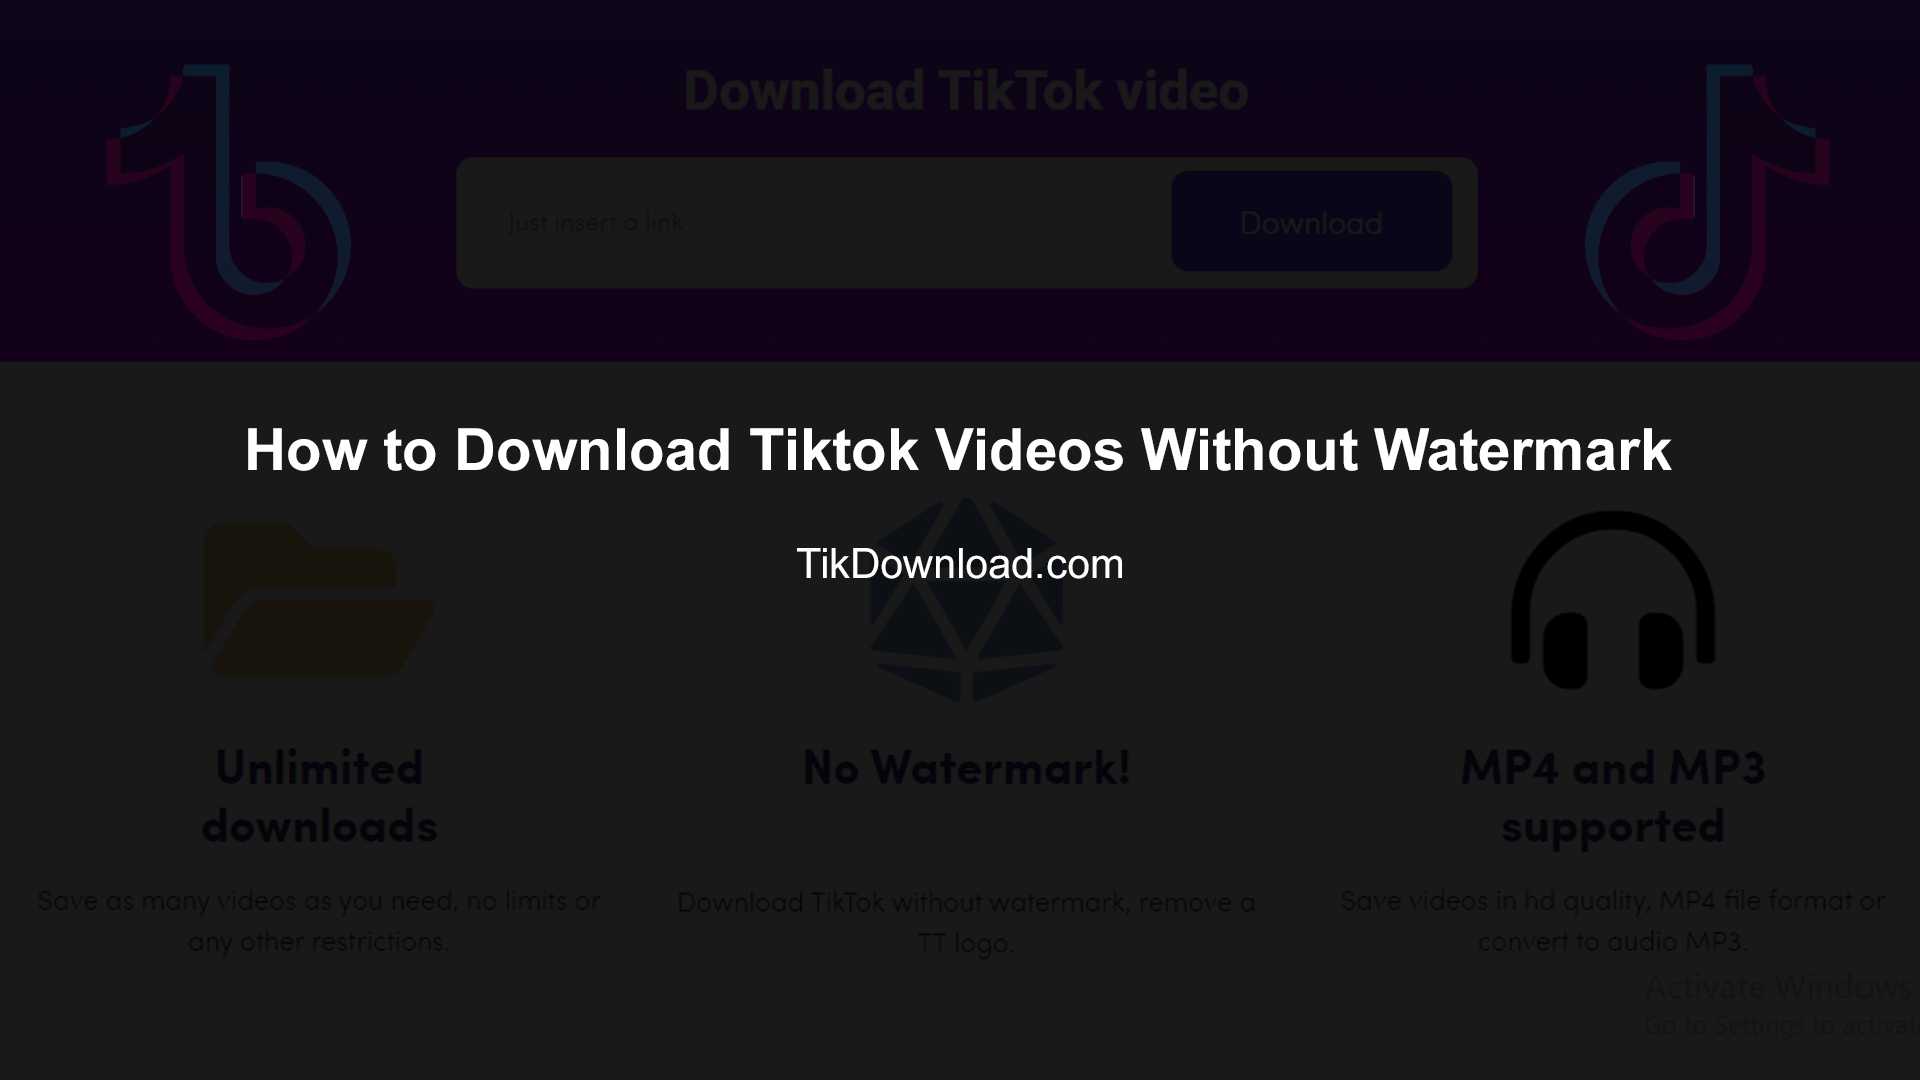 How to Download TikTok Videos without Watermark?